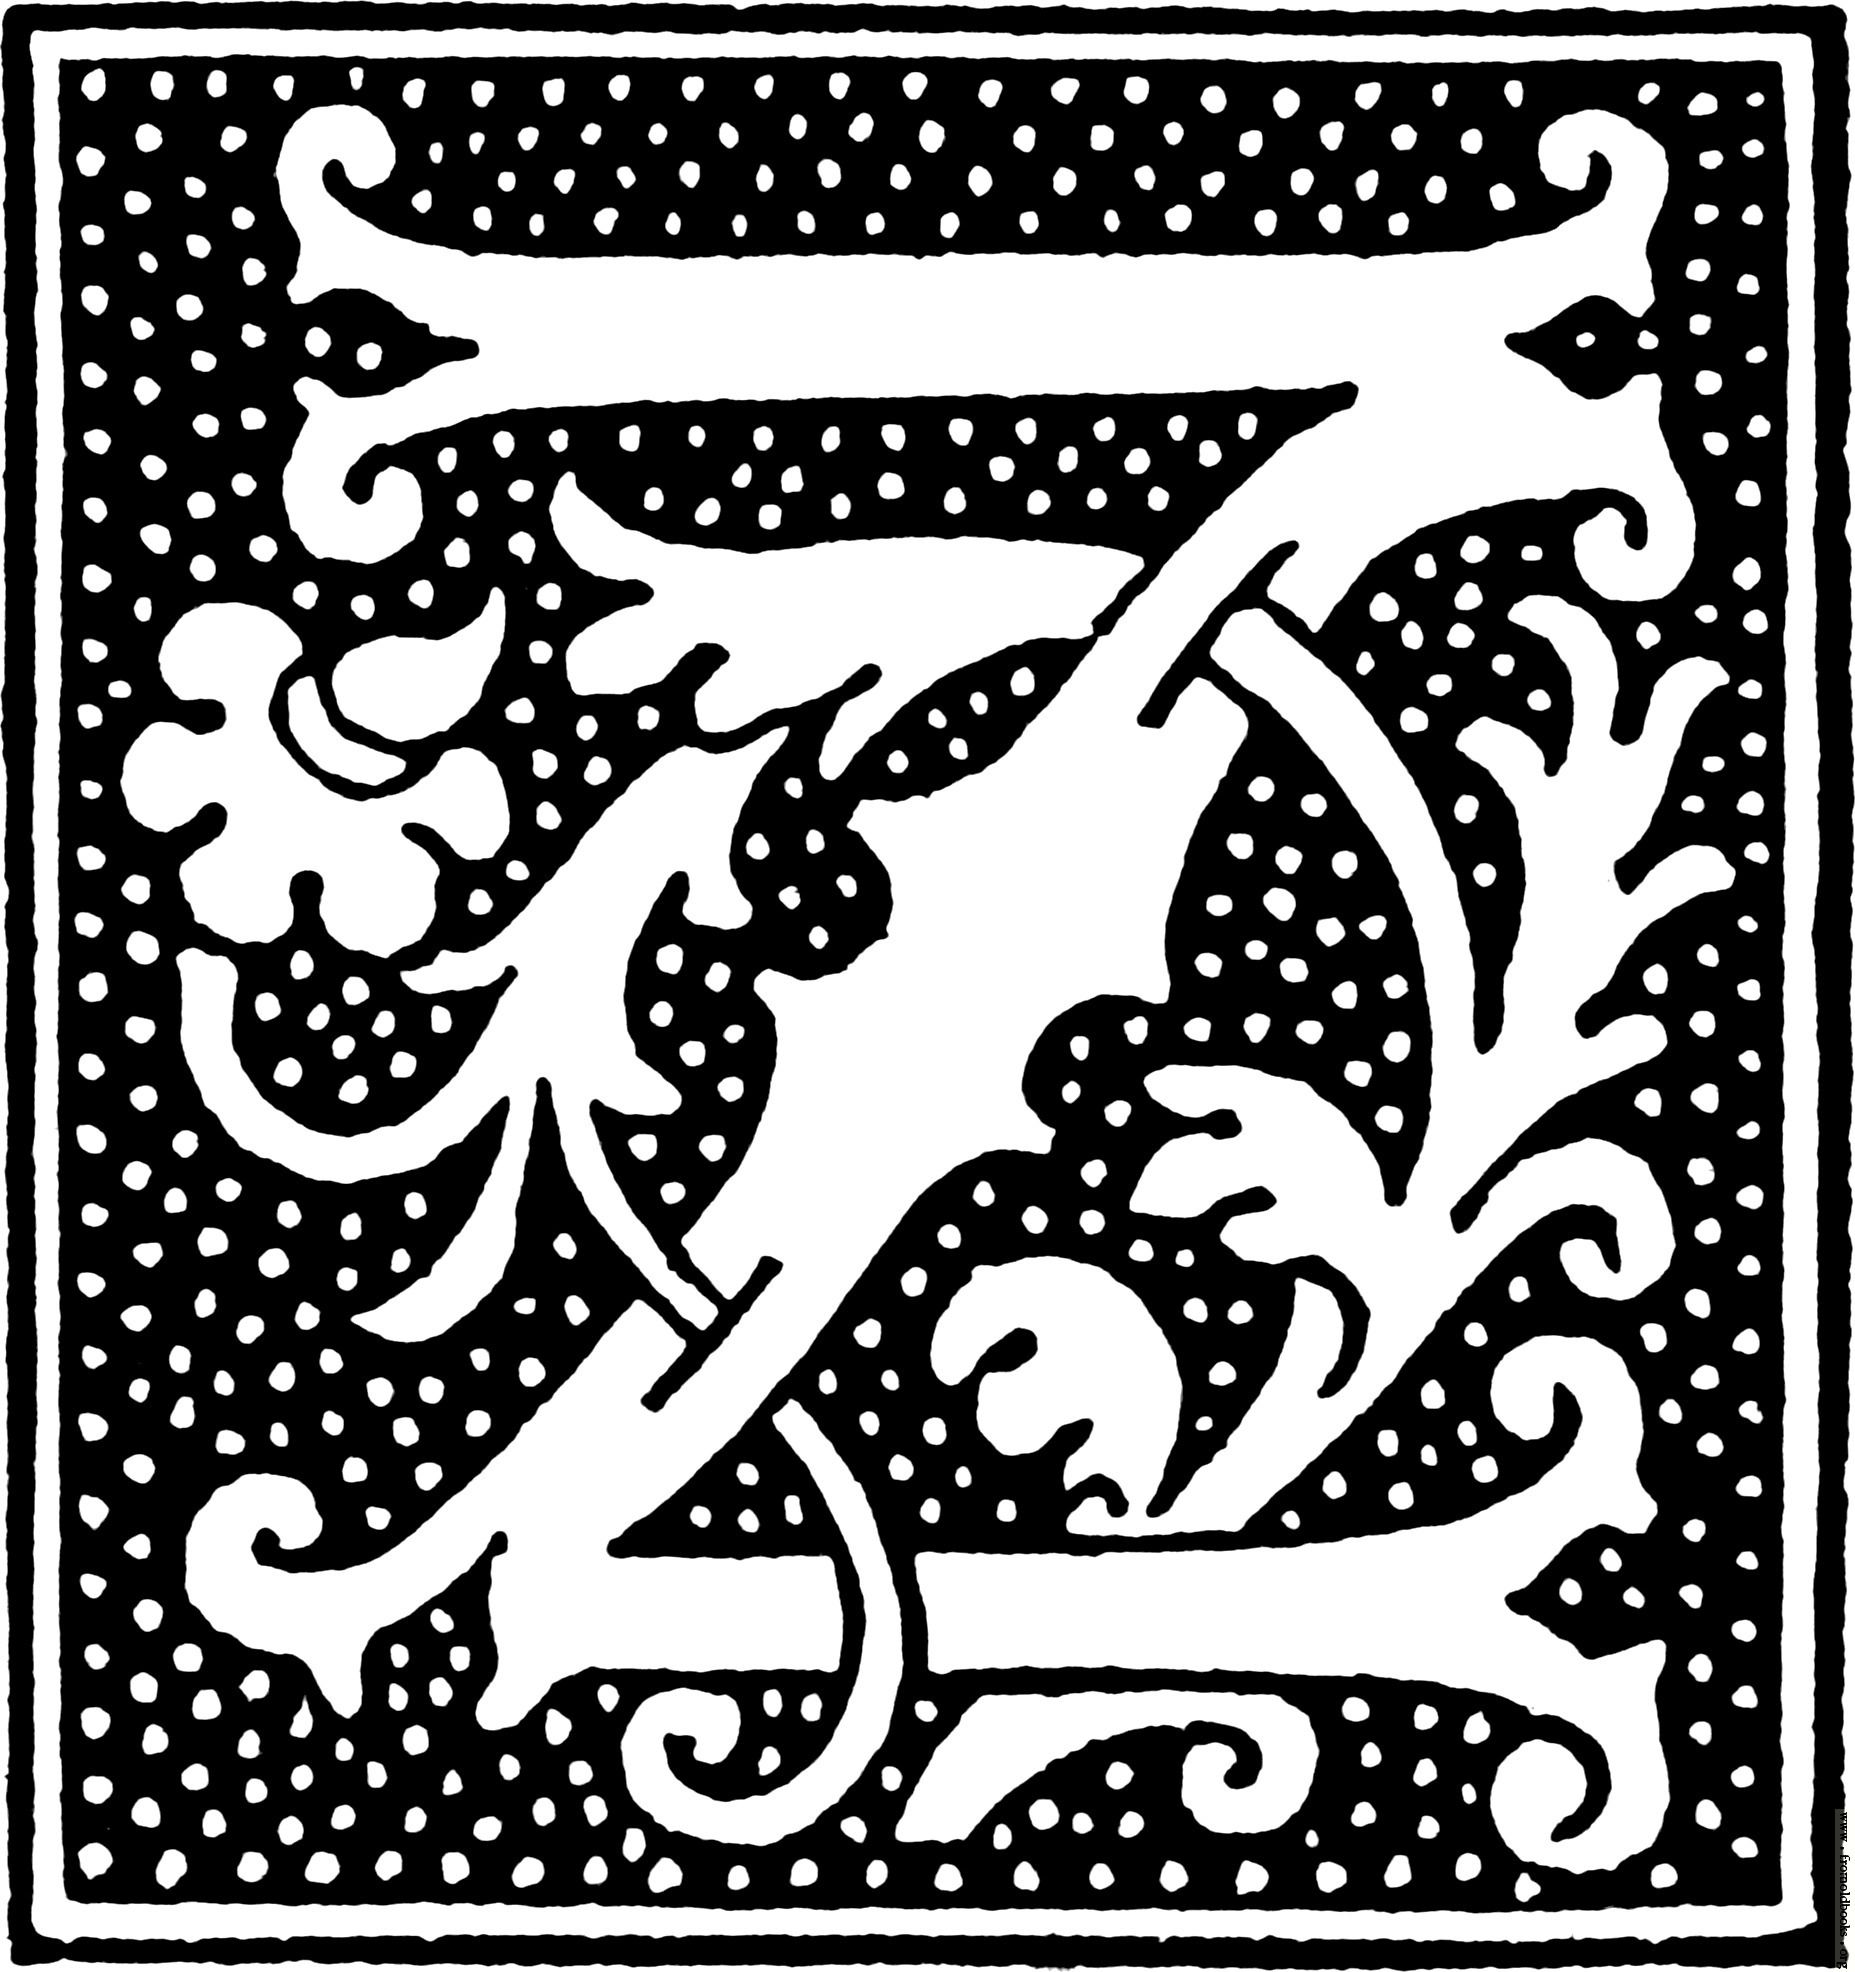 Initial Letter Z From Beginning Of The 16th Century Letter Z